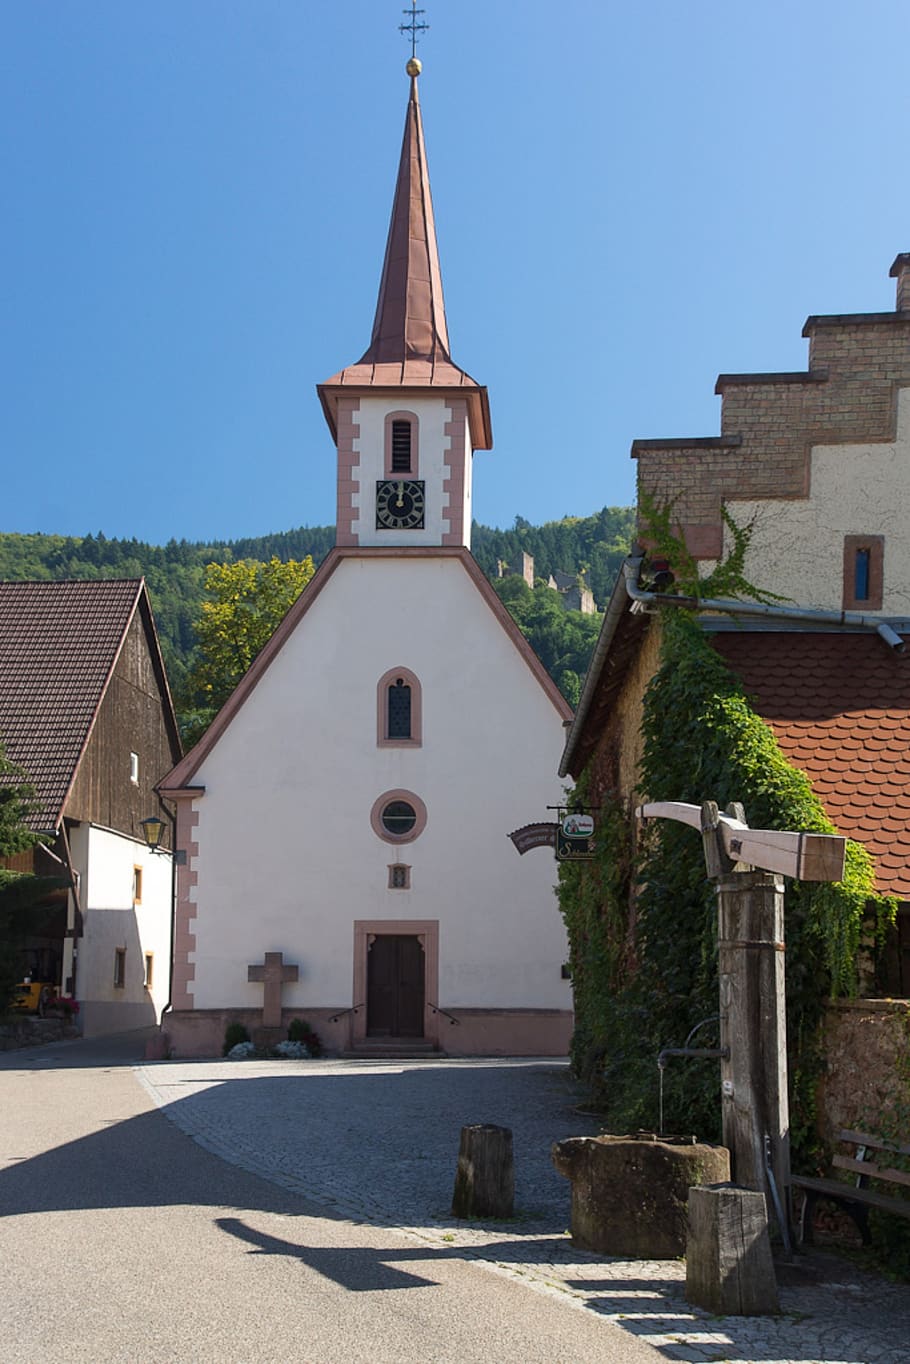 oberkirch, gaisbach, chapel of saint george, ortenau, architecture, built structure, building exterior, building, religion, place of worship